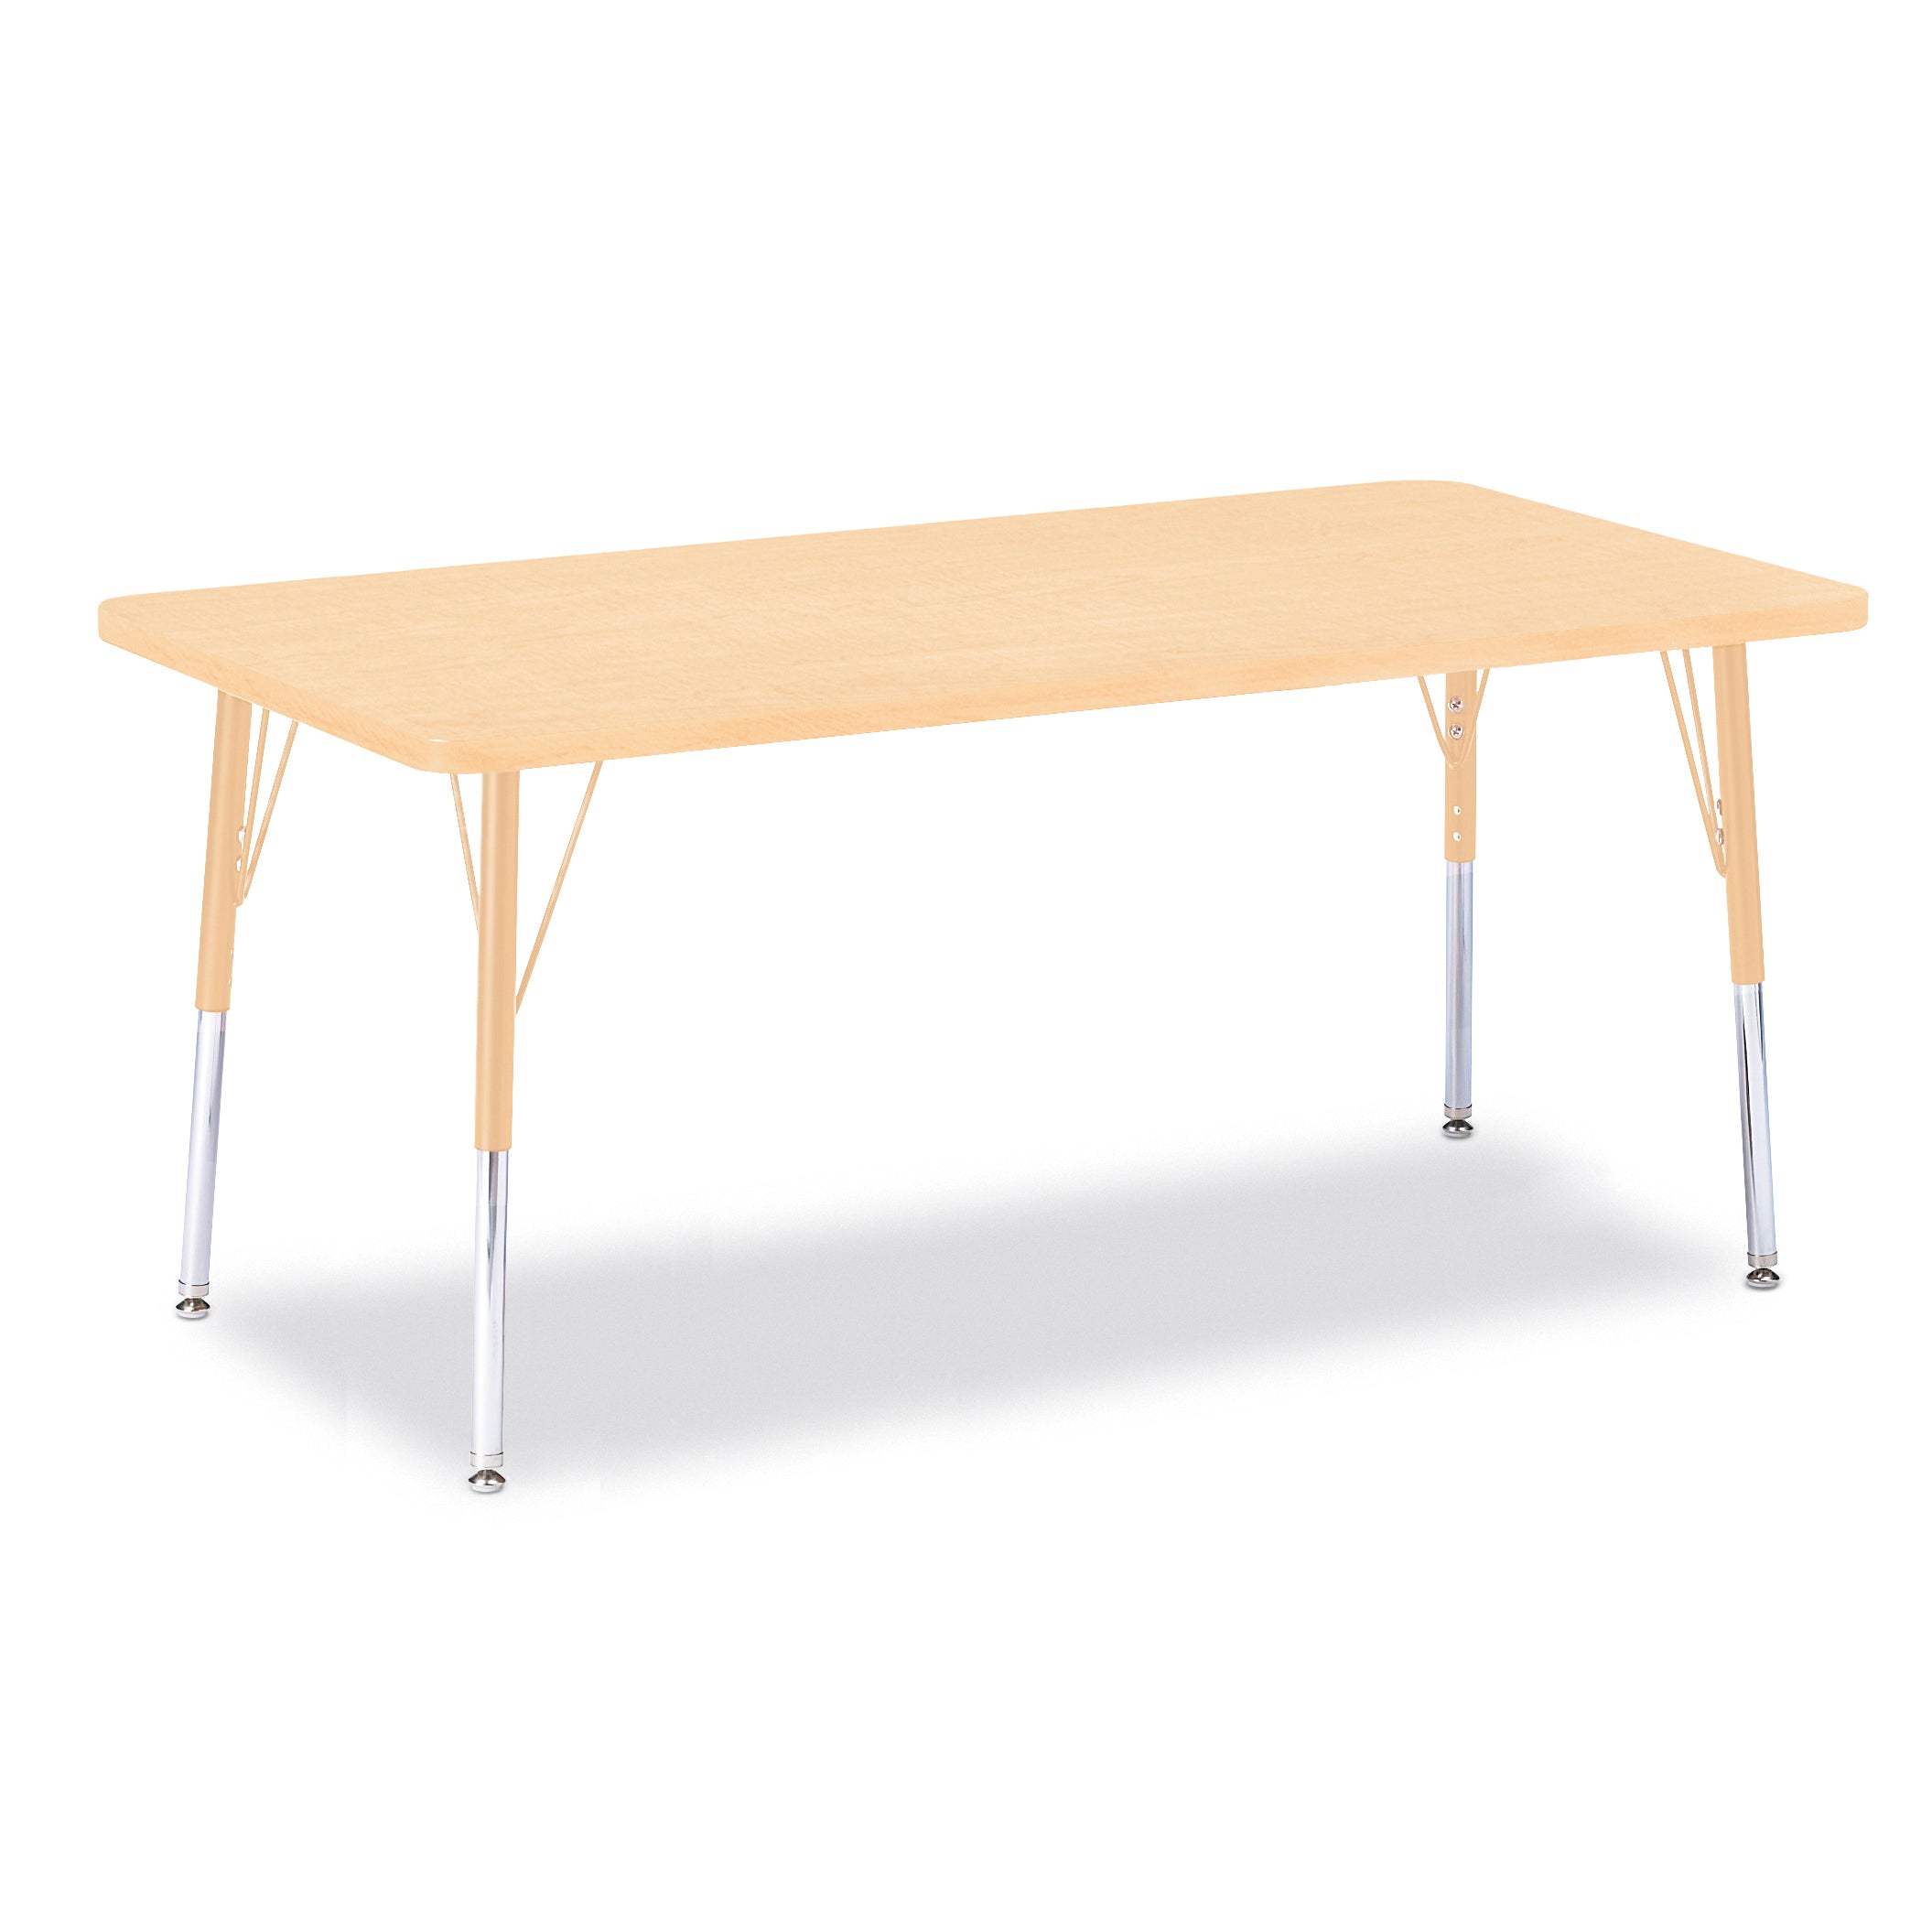 6408JCA251, Berries Rectangle Activity Table - 30" X 60", A-height - Maple/Maple/Camel